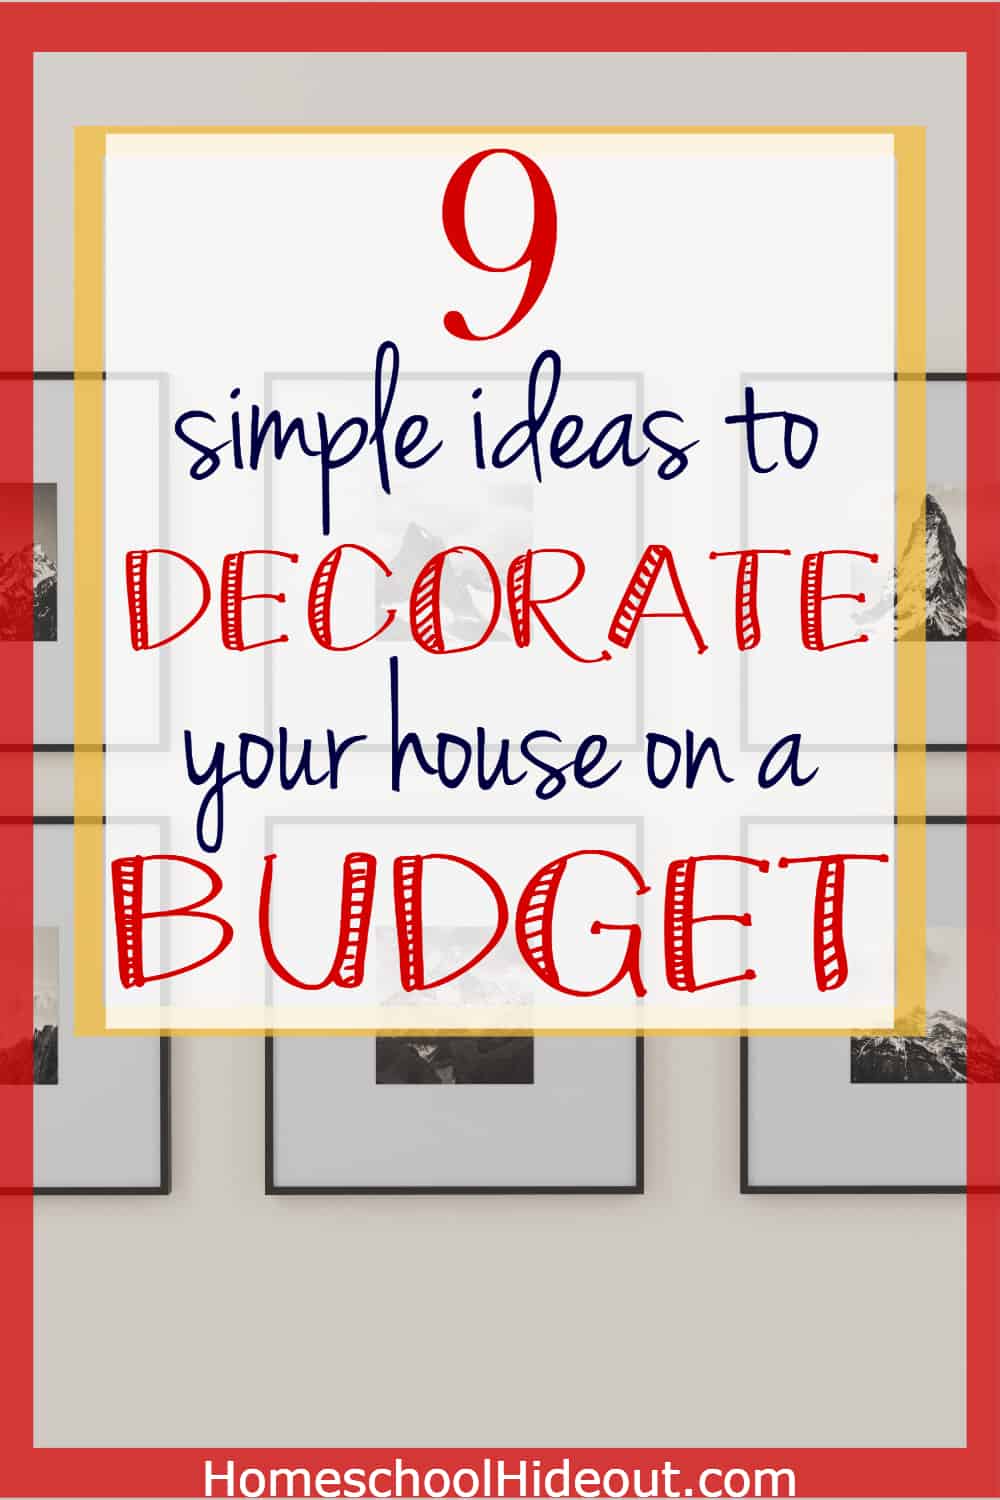 These simple tips allowed me to decorate on a budget! I always get compliments and my bank account isn't empty due to redecorating!